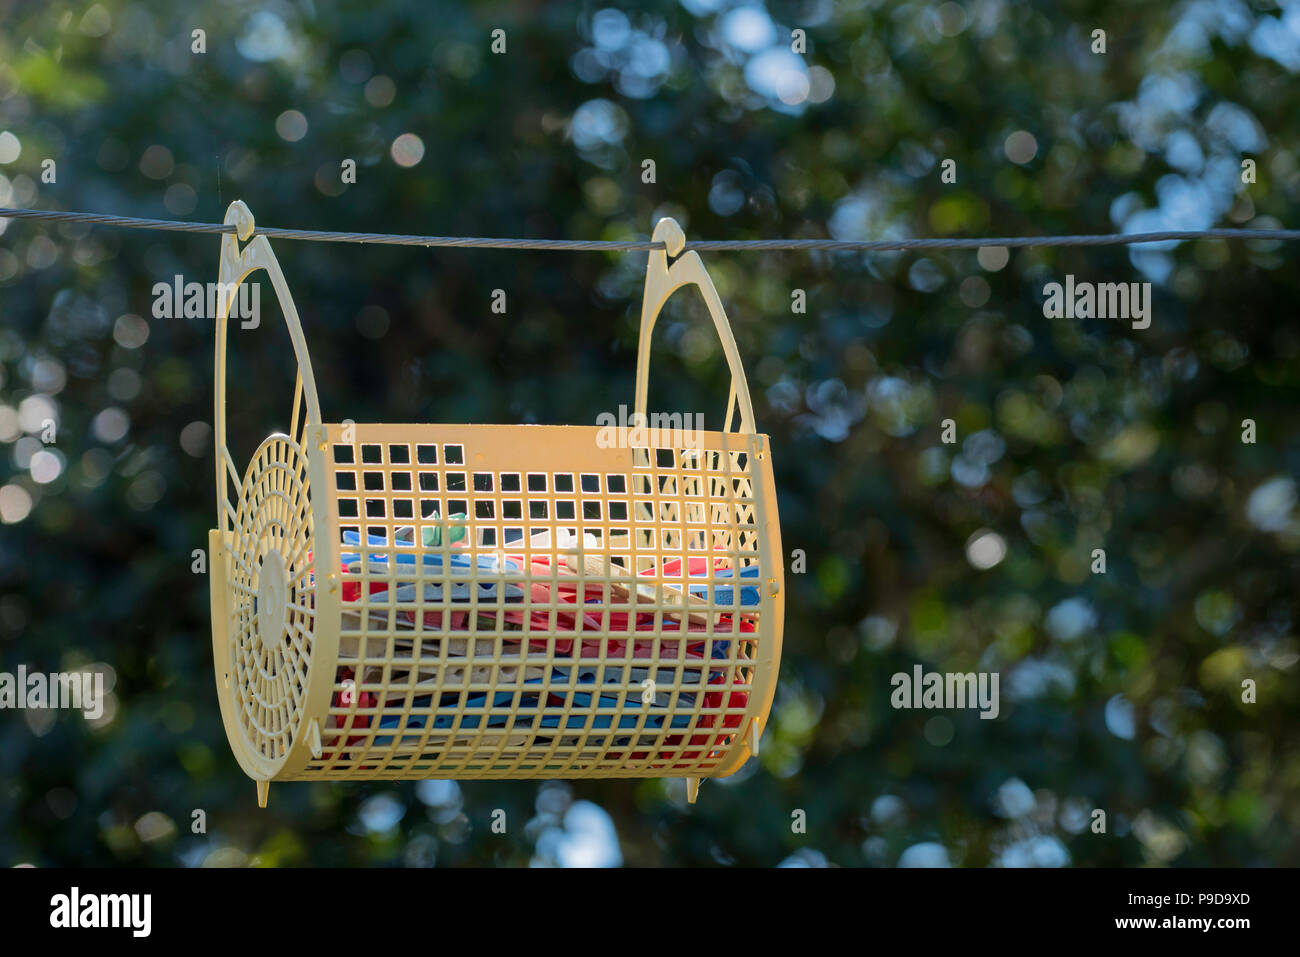 A plastic clothes basket hanging from a metal line as part of a Hills Hoist Clothes line in Australia Stock Photo